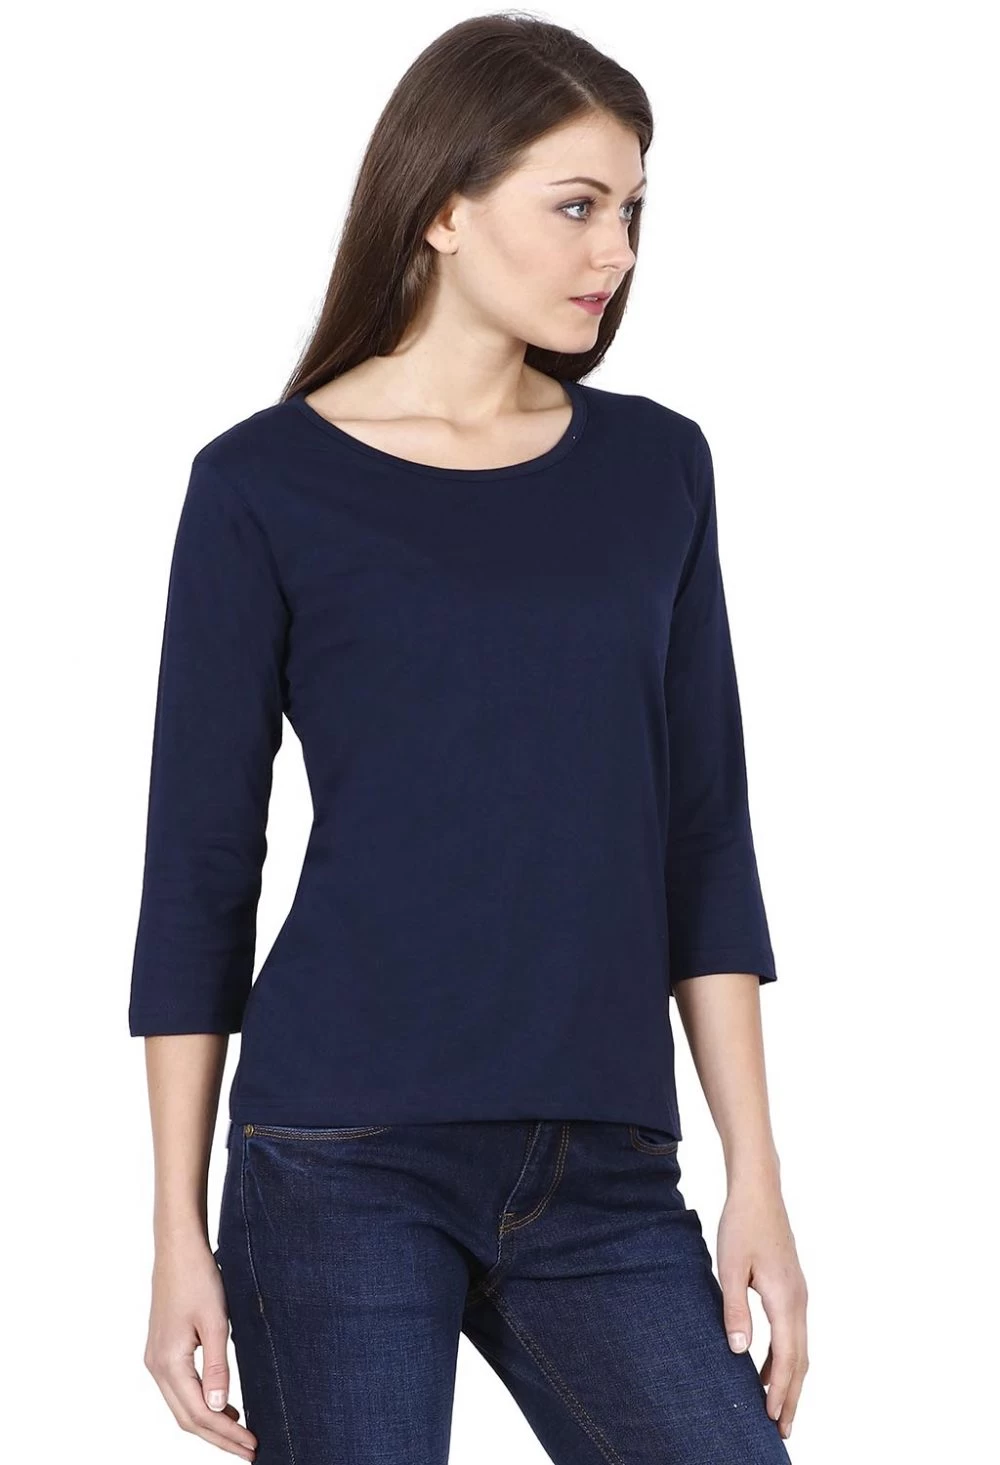 Womens Solid Navy Blue 34 Sleeve T Shirt 